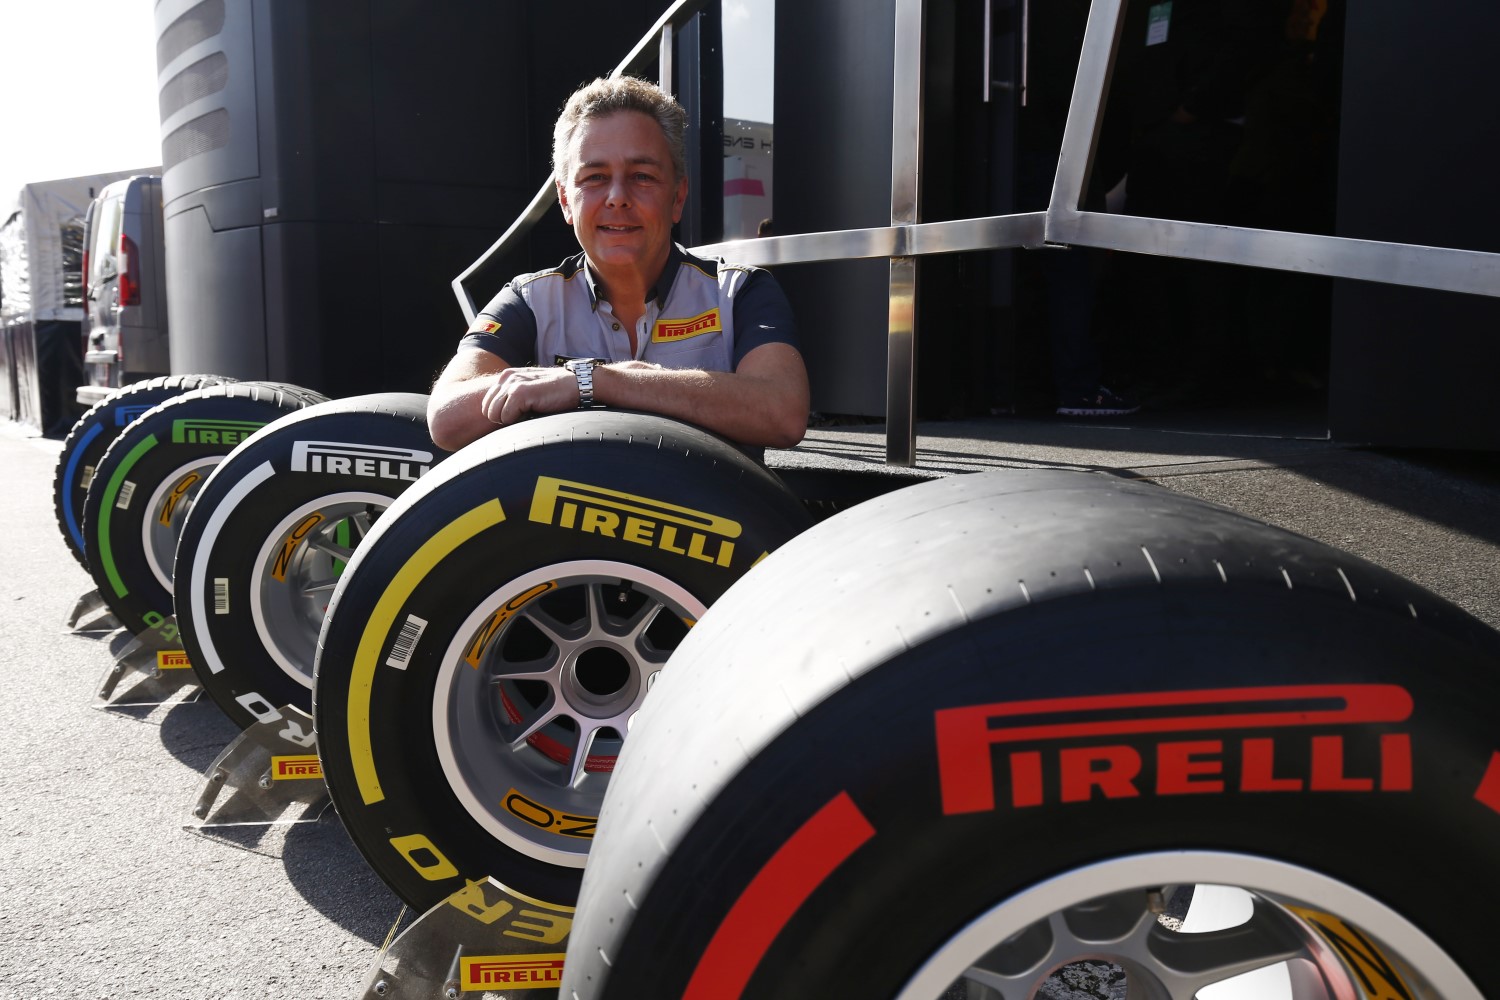 No change in F1 tires for 2020